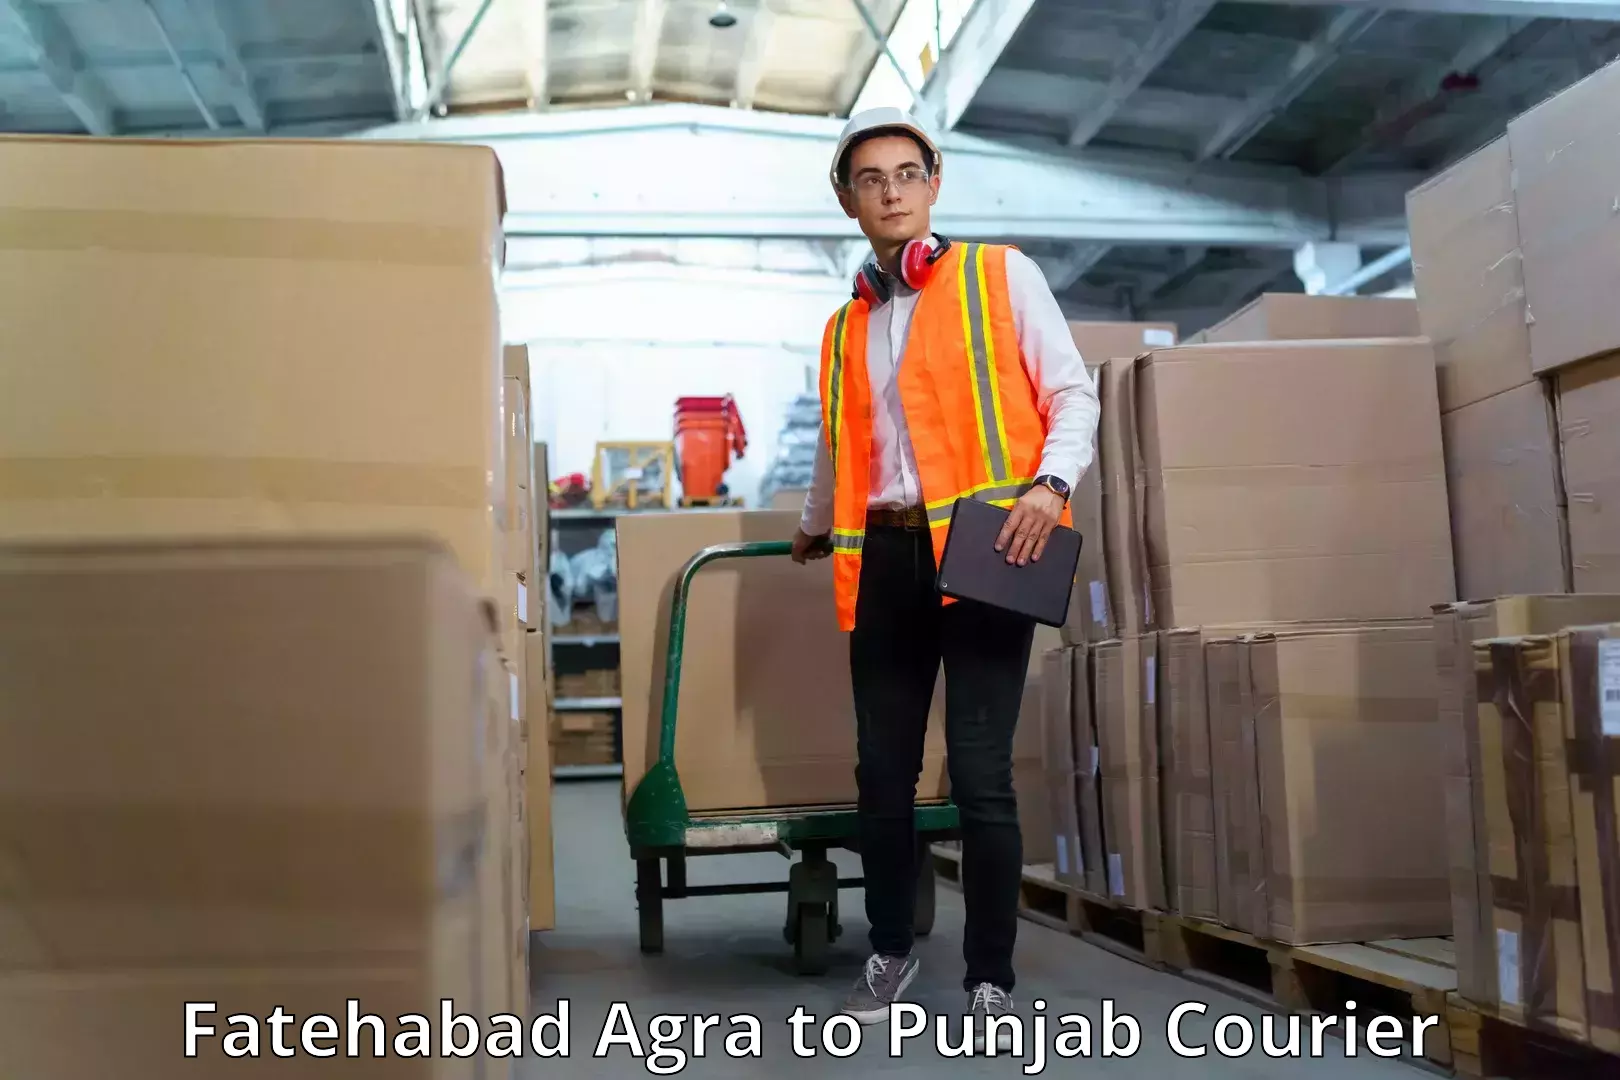 Affordable parcel service Fatehabad Agra to Zira